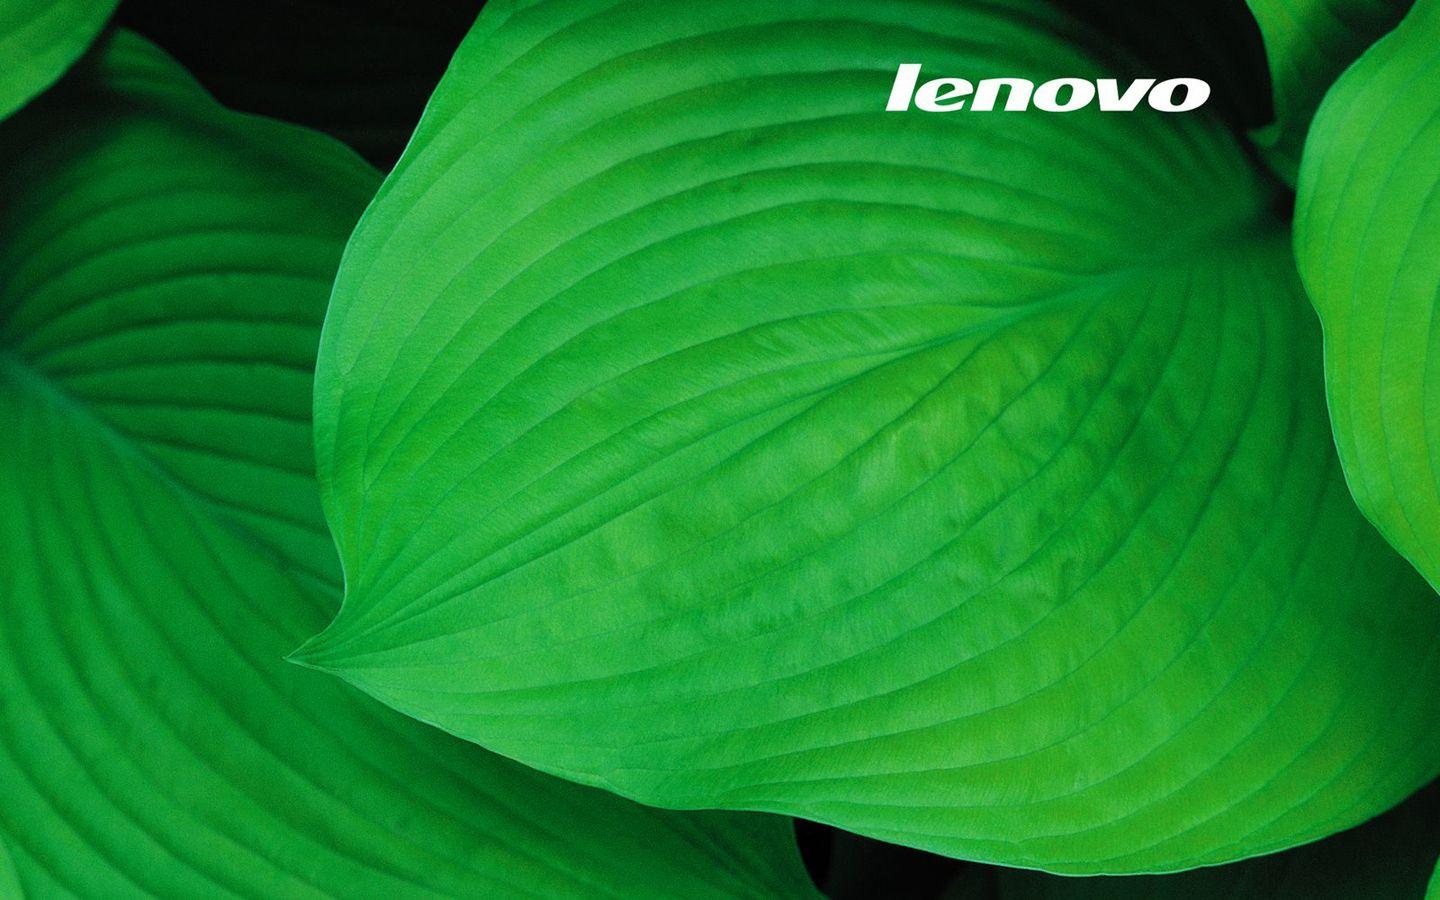 The best Lenovo wallpaper ideas. HD android